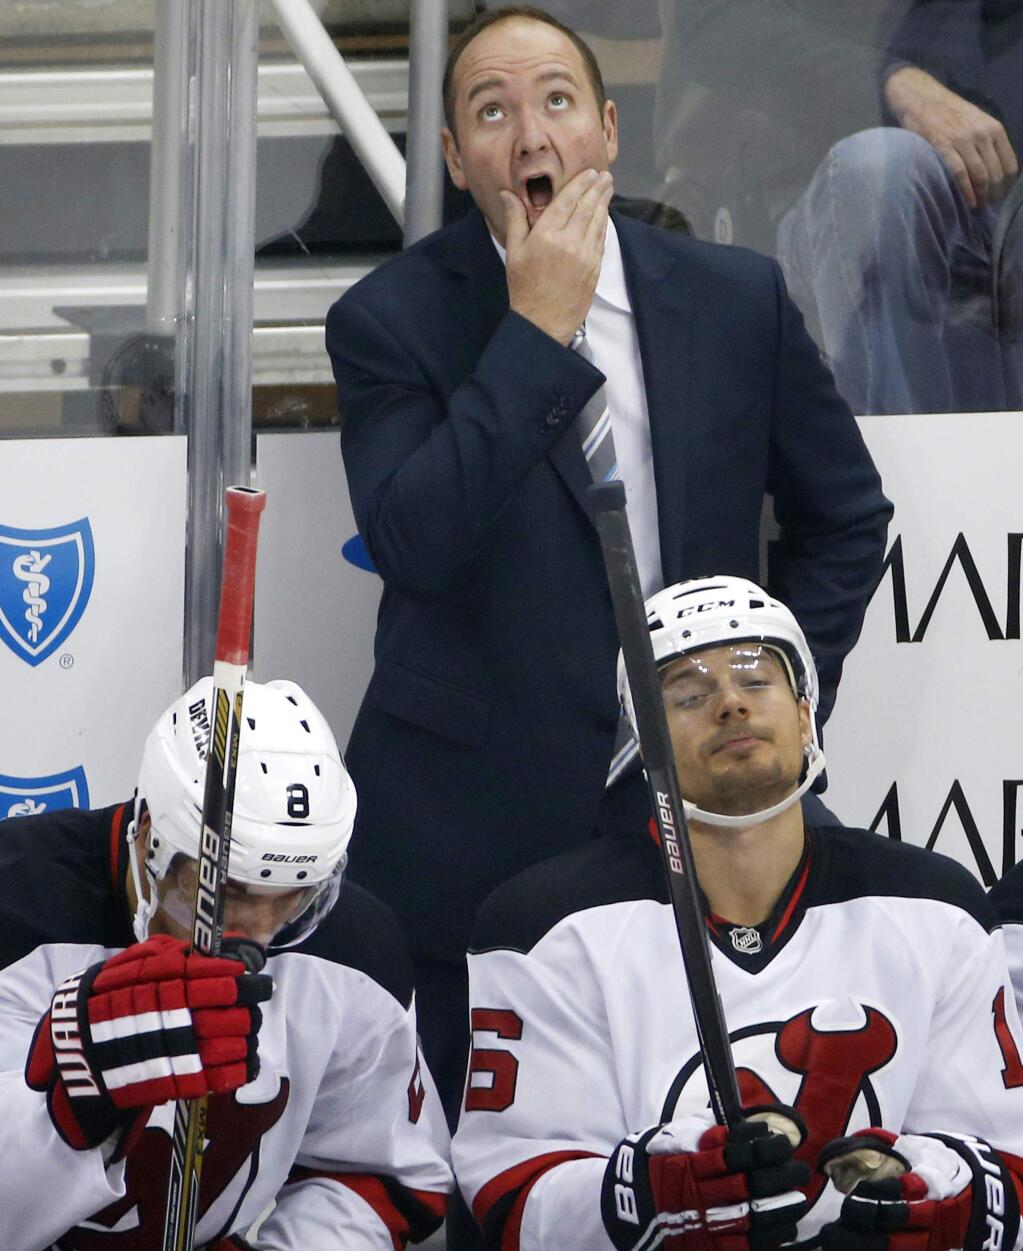 FILE - In this Oct. 28, 2014, file photo, New Jersey Devils head coach Peter DeBoer looks at the scoreboard during the first period of an NHL hockey game against the Pittsburgh Penguins in Pittsburgh. The Devils fired DeBoer on Friday, Dec. 26, 2014. (AP Photo/Gene J. Puskar, File)